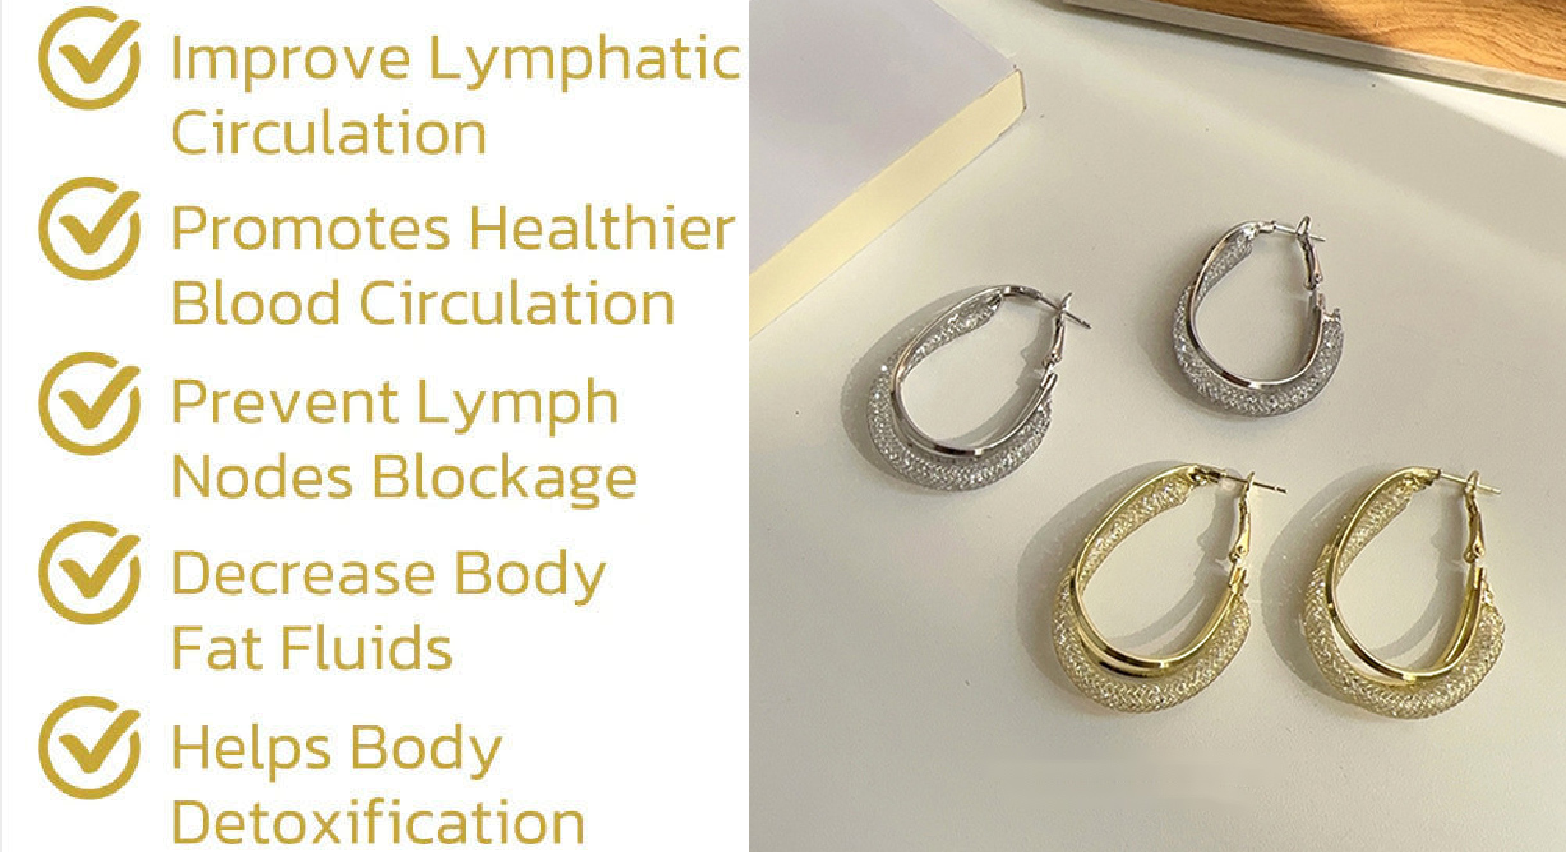 Lymphatic Fashion Oval Earrings,Promoting Lymphatic Drainage And  Detoxification,Lymphatic Slimming Earrings